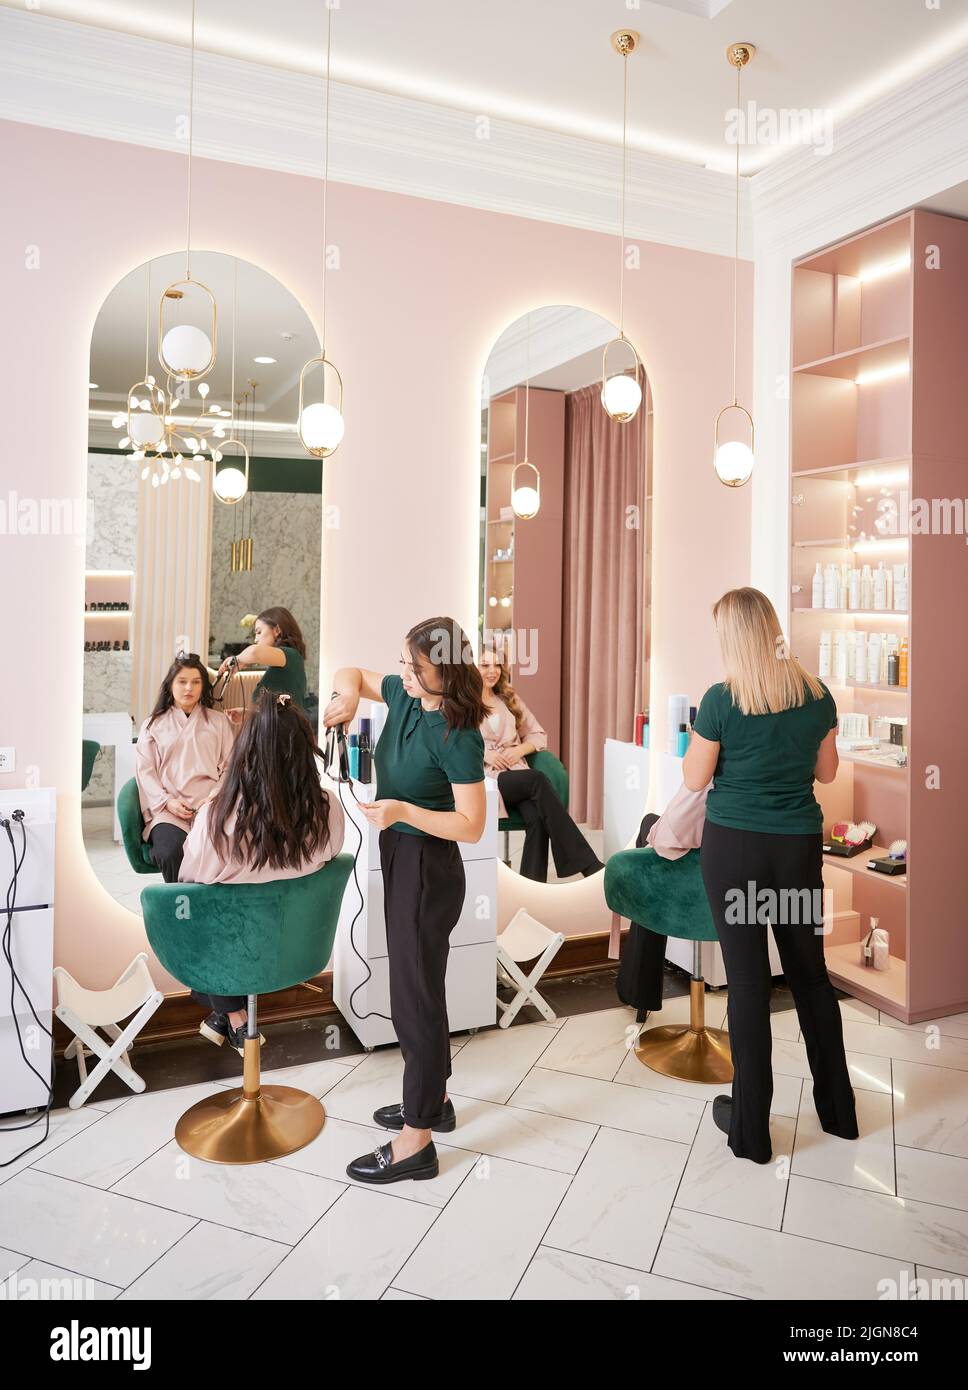 Two female hairstylists curling client hair and doing hairstyle in modern beauty salon. Young women sitting in chairs in front of mirrors while hairdressers styling clients hair. Stock Photo